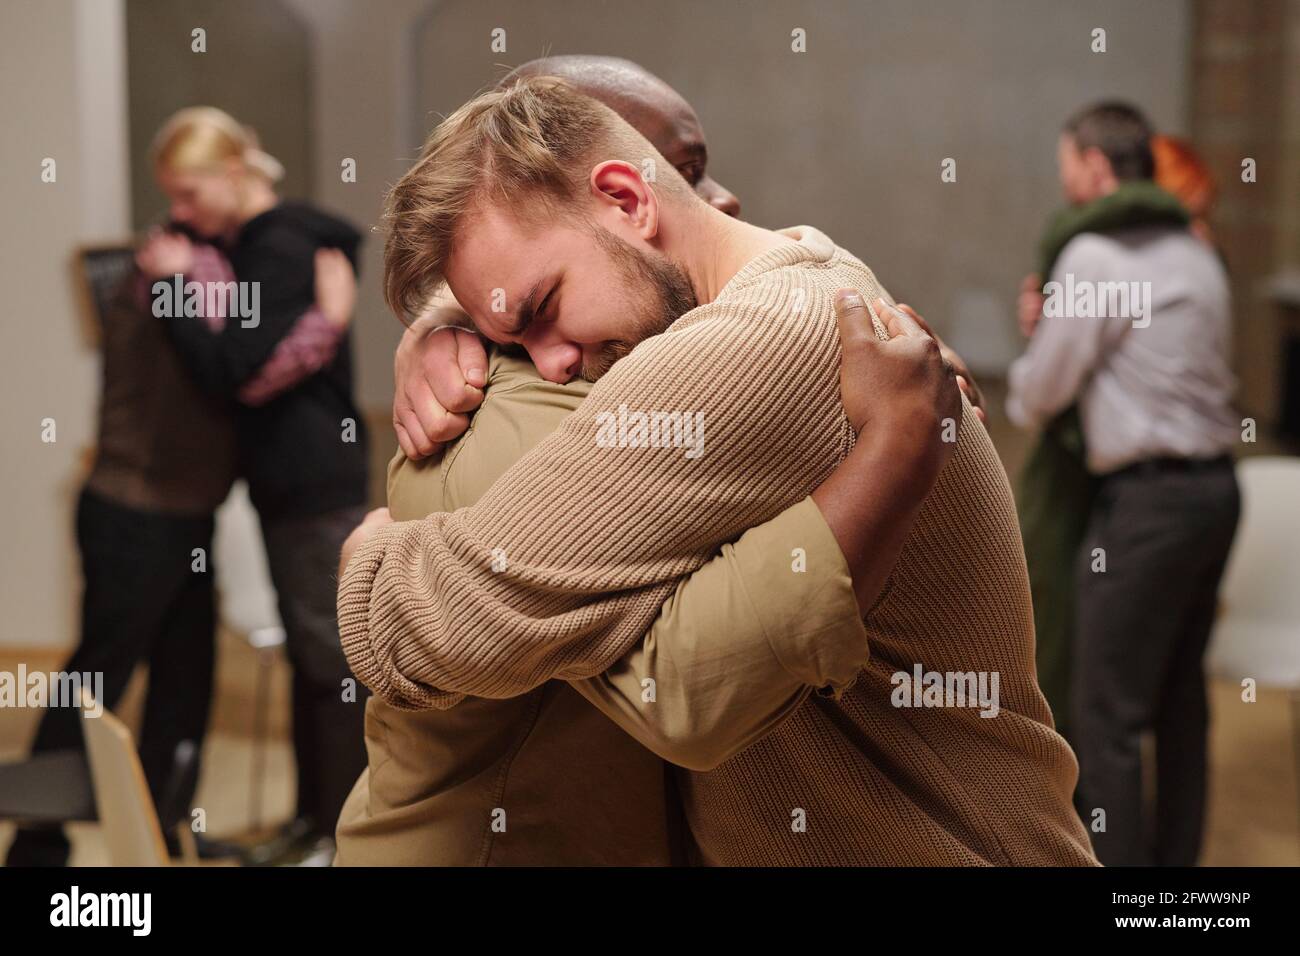 Two young intercultural man embracing while one of them crying Stock Photo